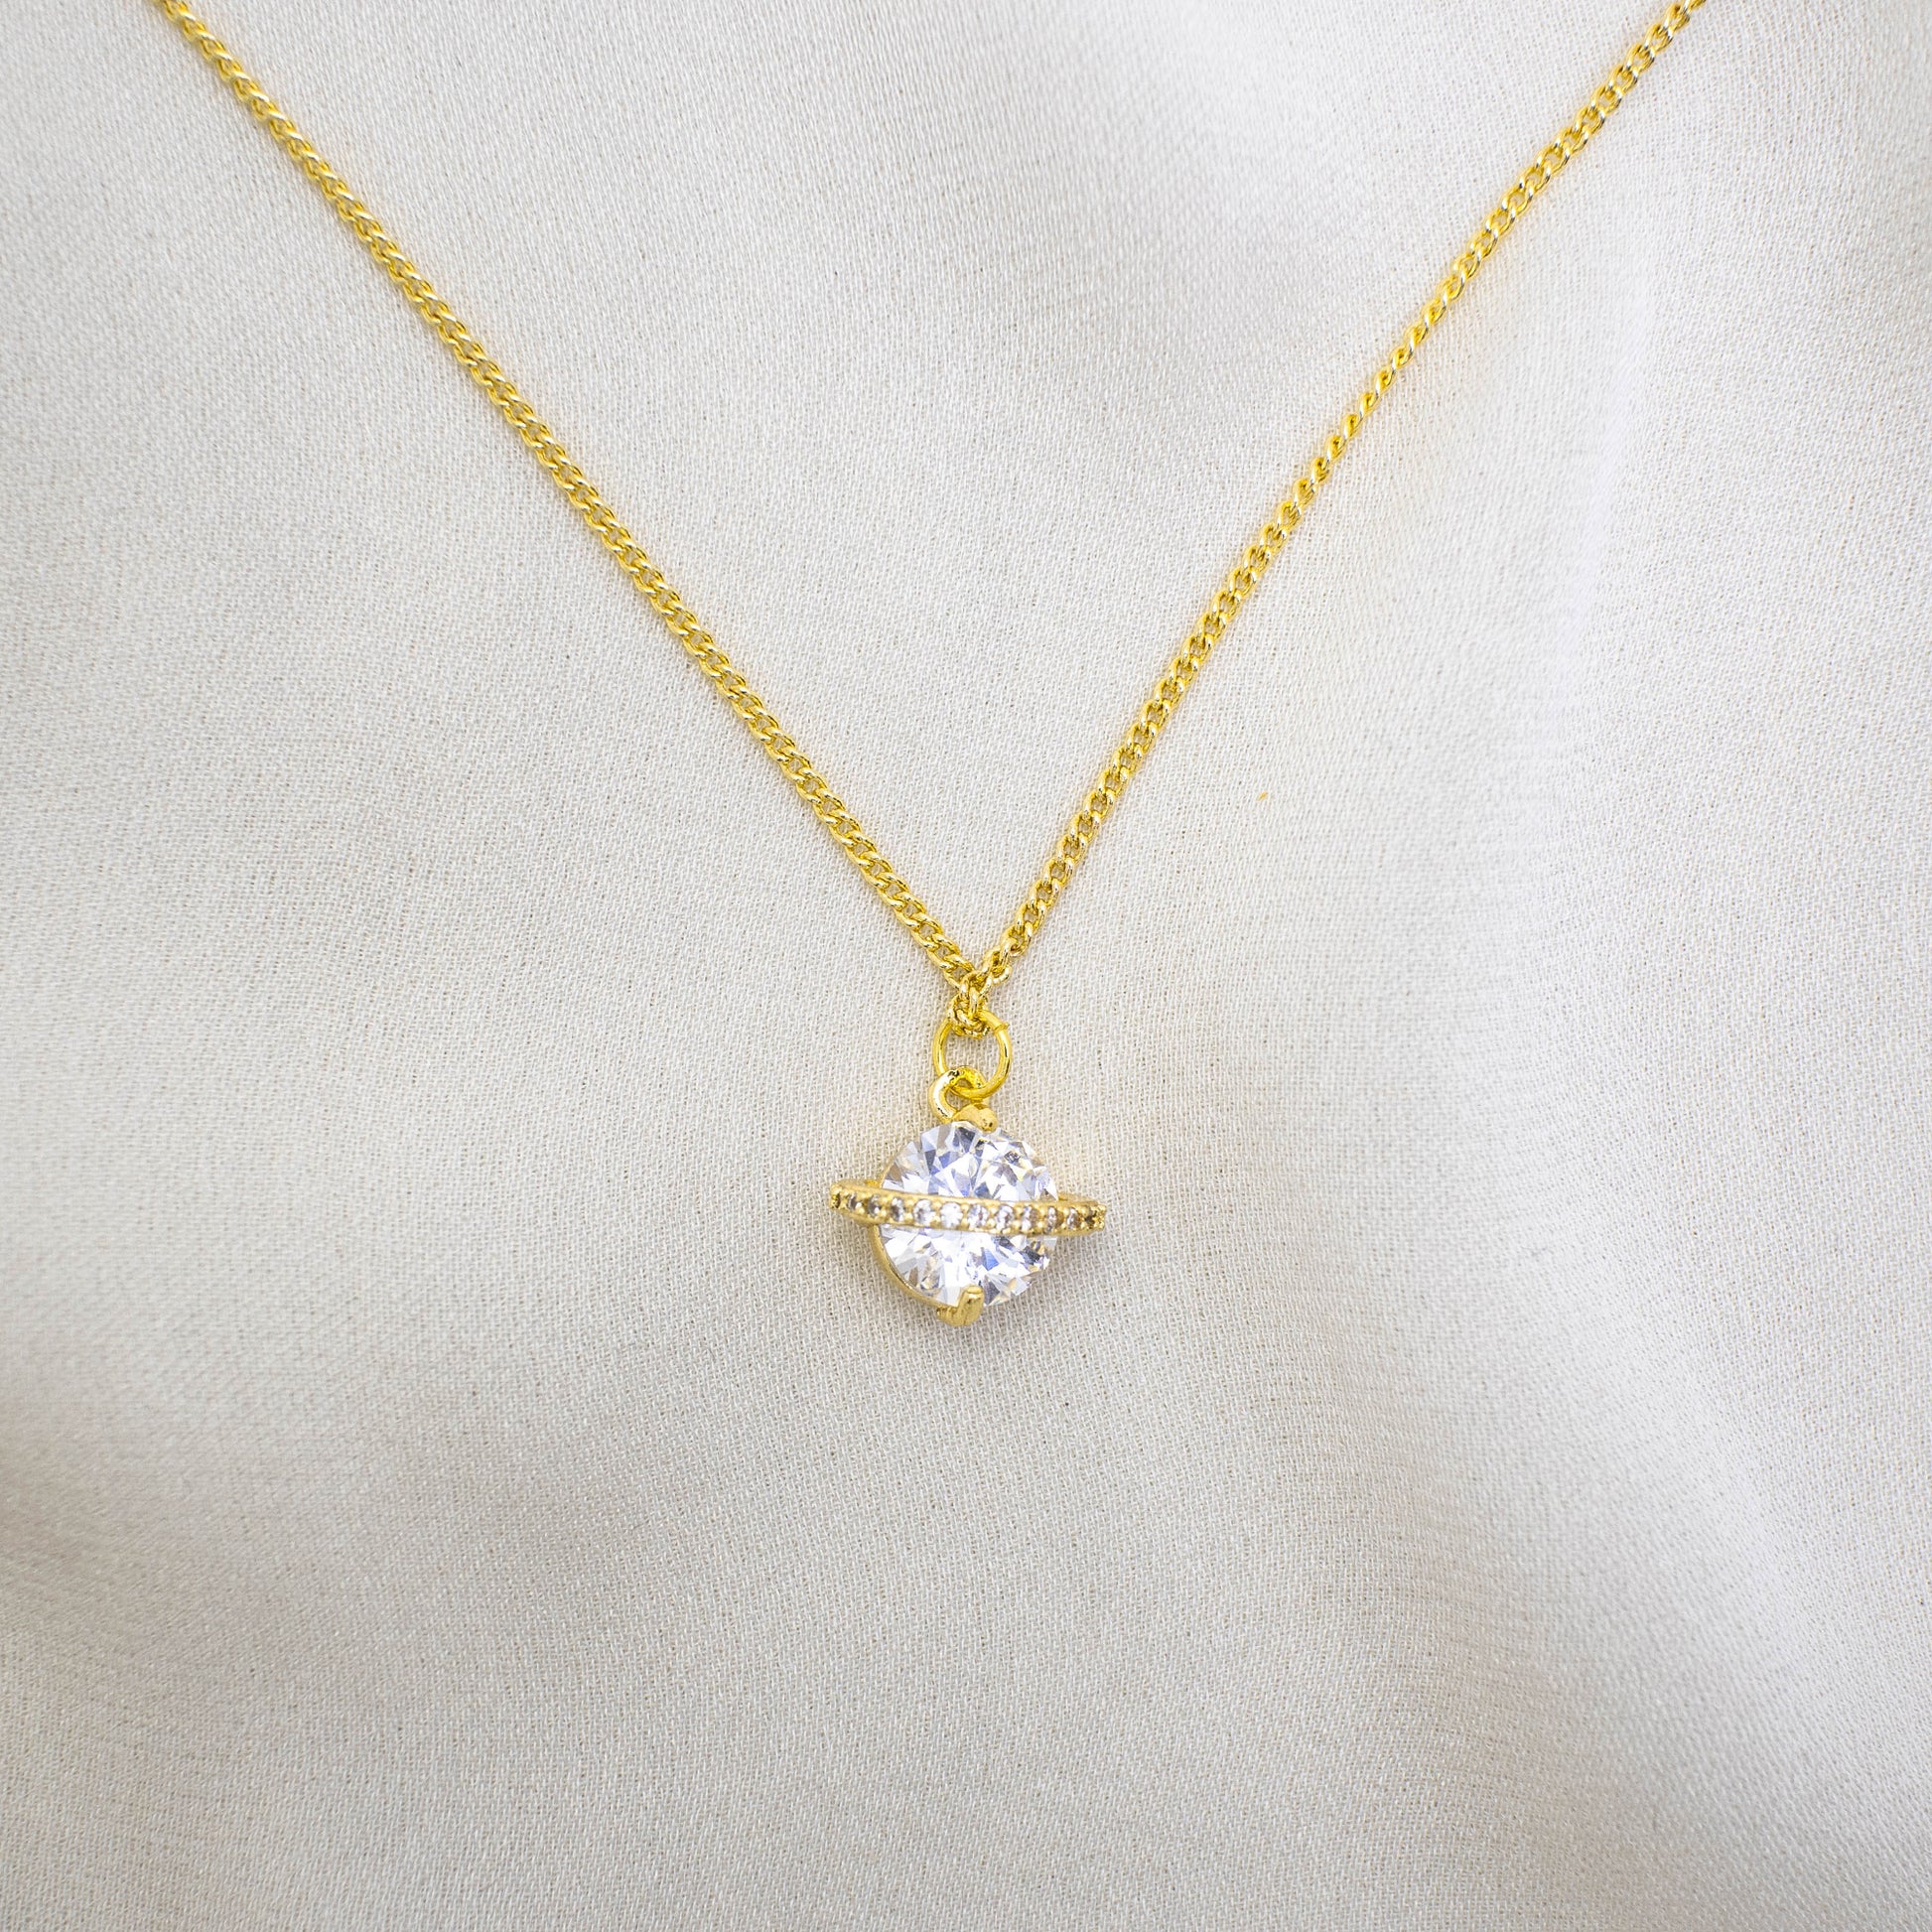 This photo features a thin chain necklace made of 14K gold-plated sterling silver, paired with a zircon planet pendant.